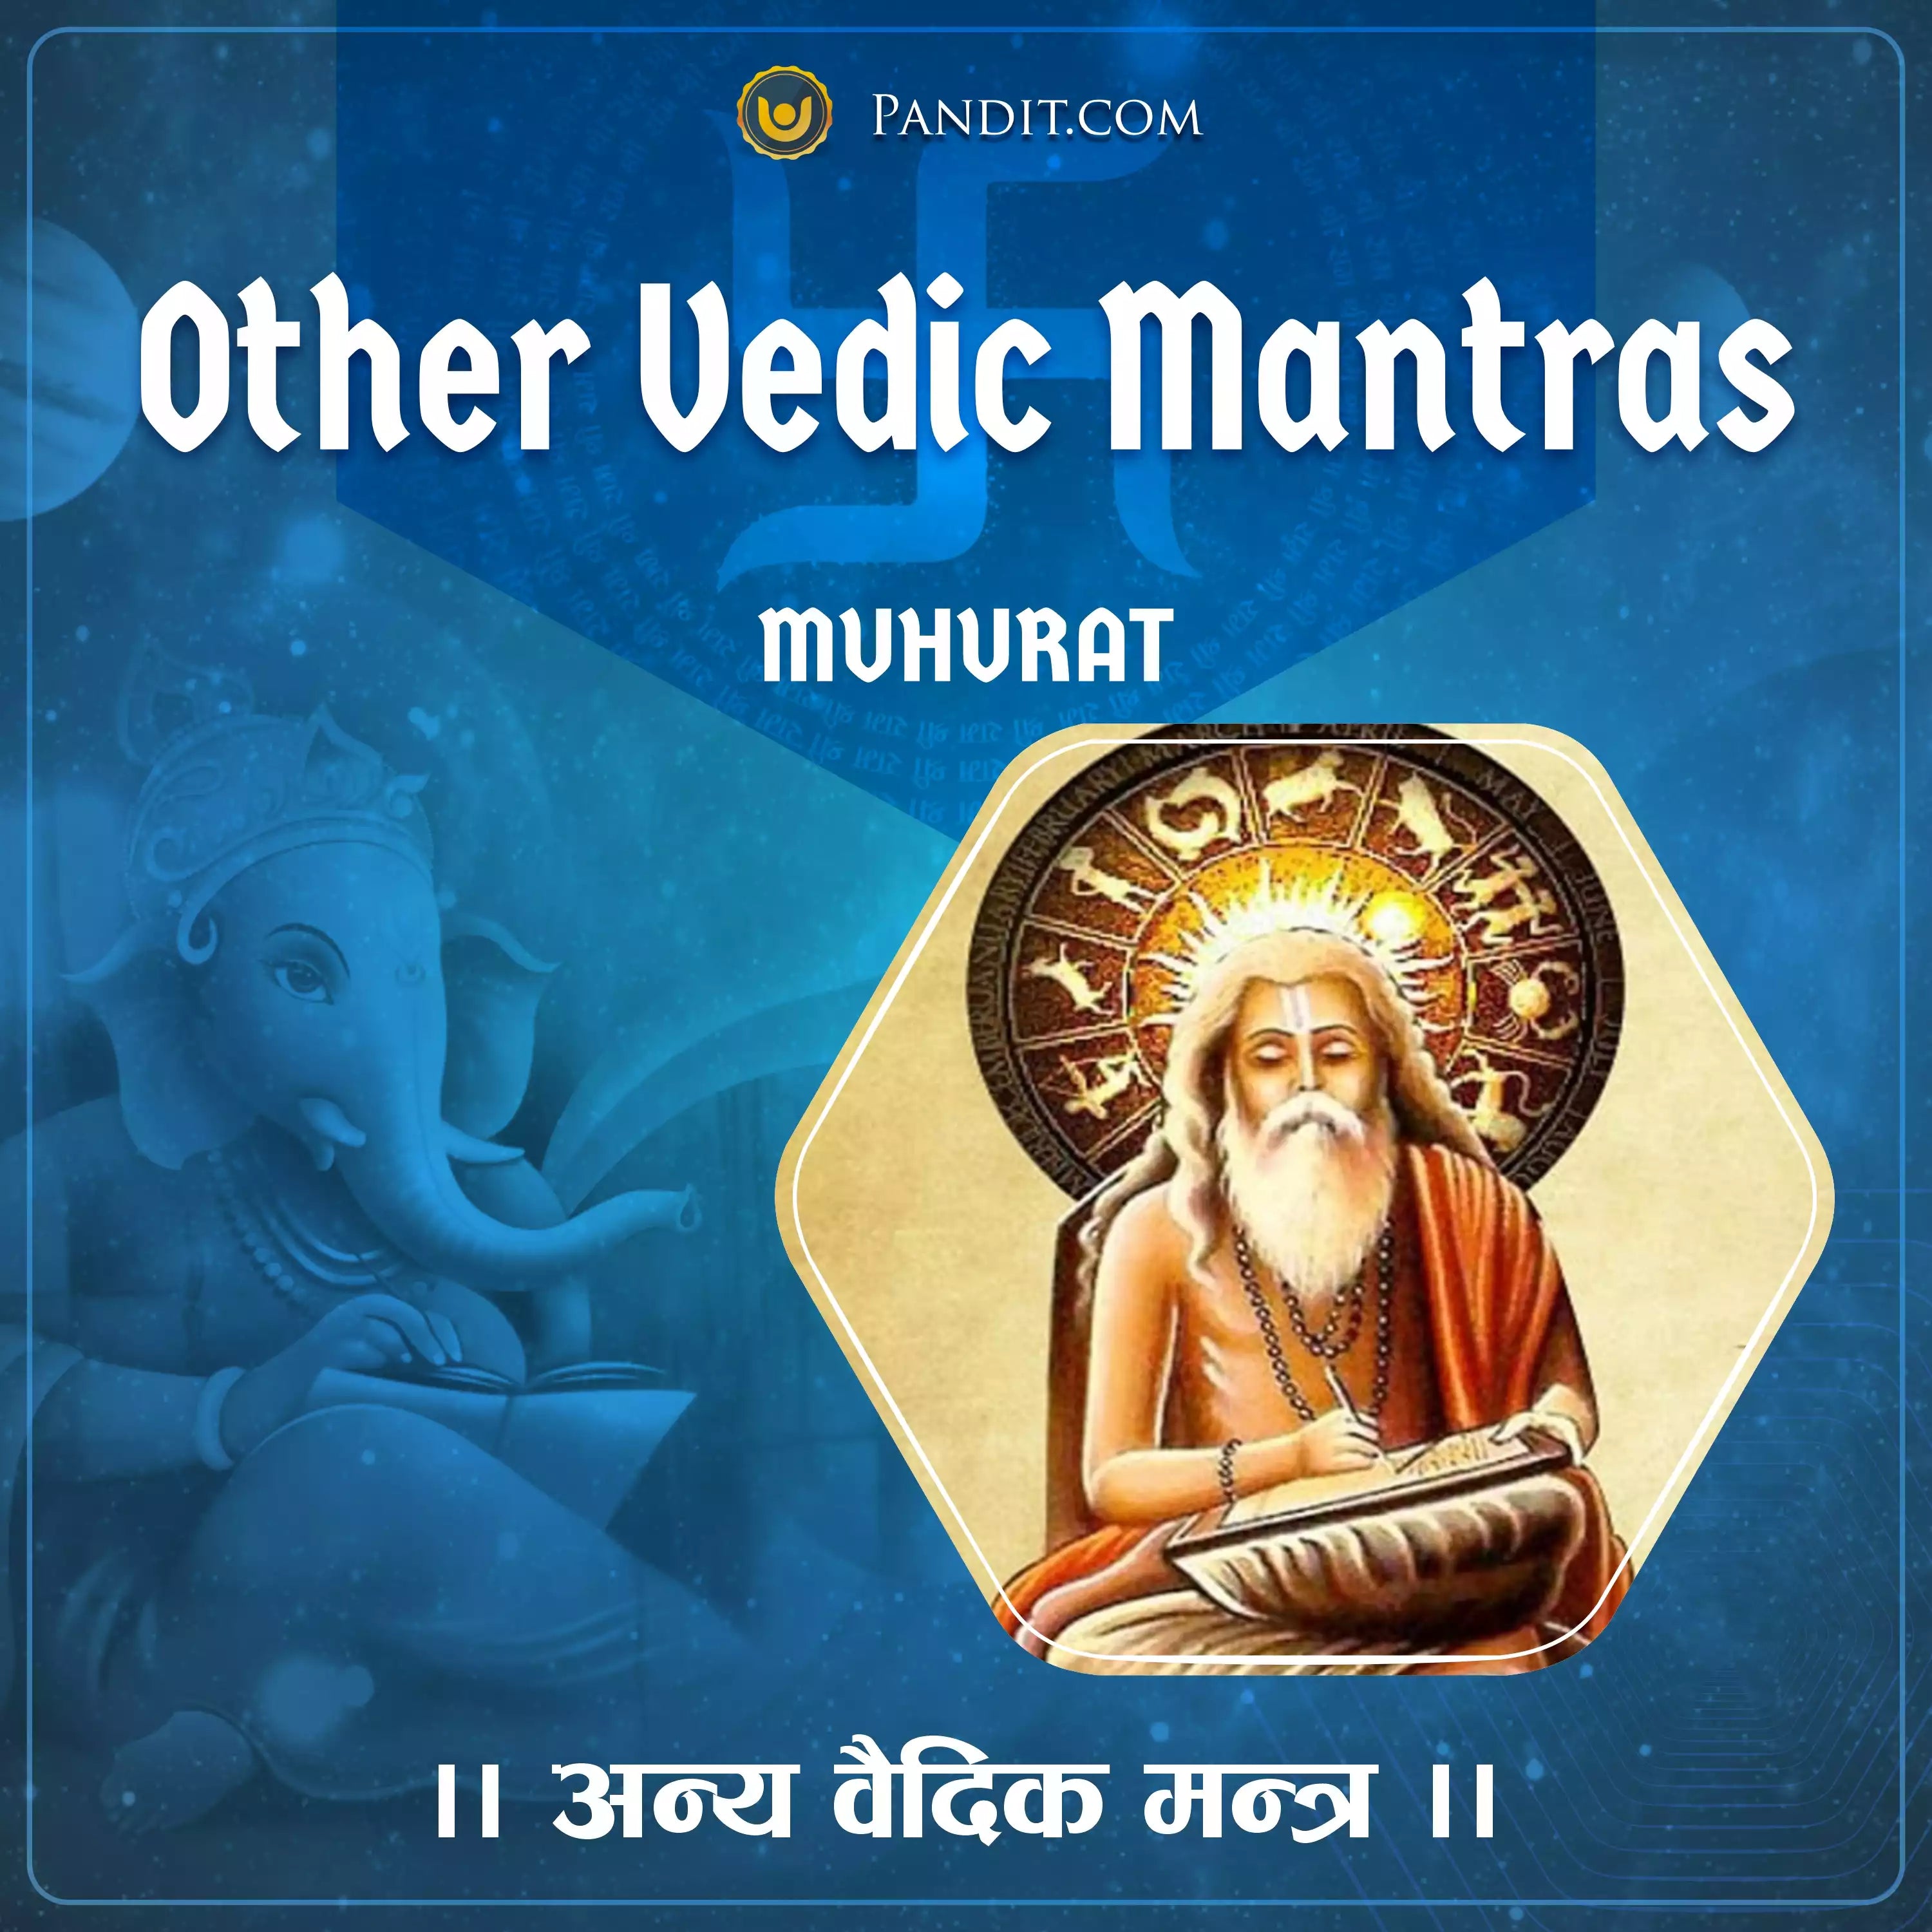 Other Vedic Mantras